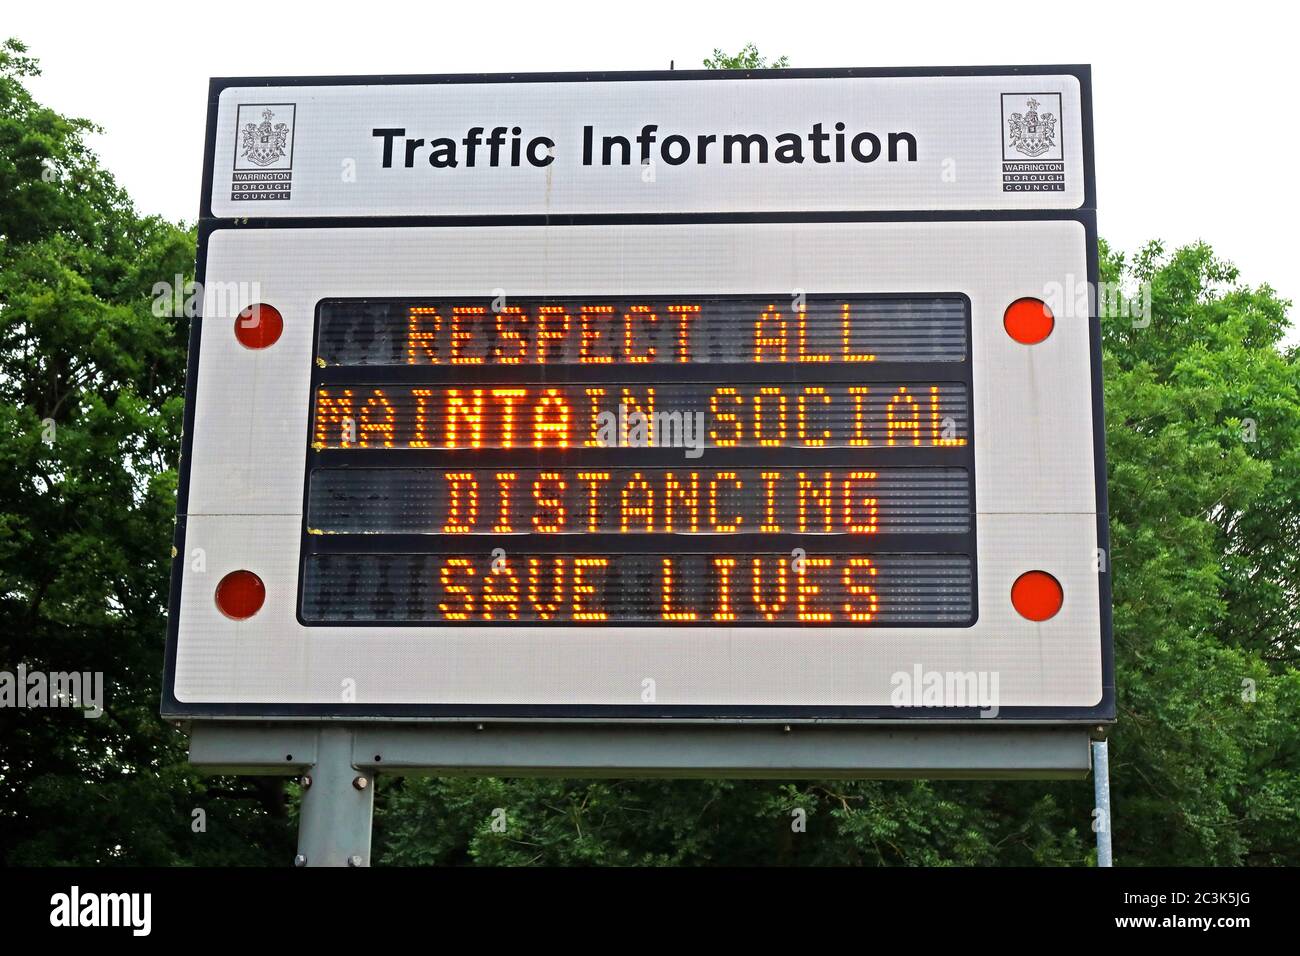 Traffic Information Sign,showing Respect All,maintain Social Distancing , save lives public information during Coronavirus,Covid19,Covid-19 Stock Photo